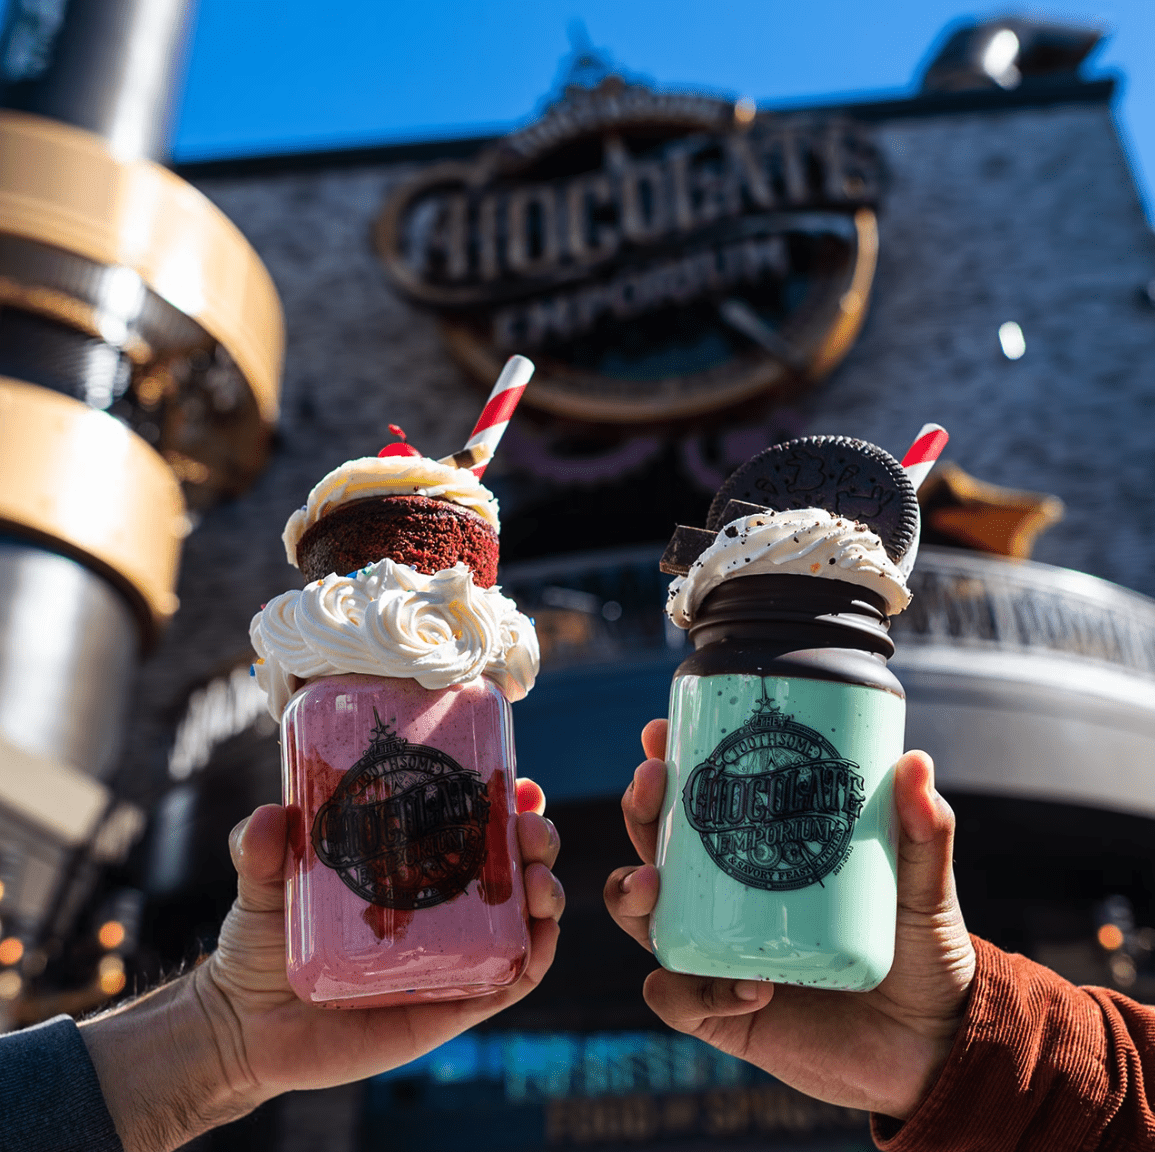 Jacques' Specialty Shakes at The Toothsome Chocolate Emporium & Savory Feast Kitchen at Universal CityWalk in Burbank, CA